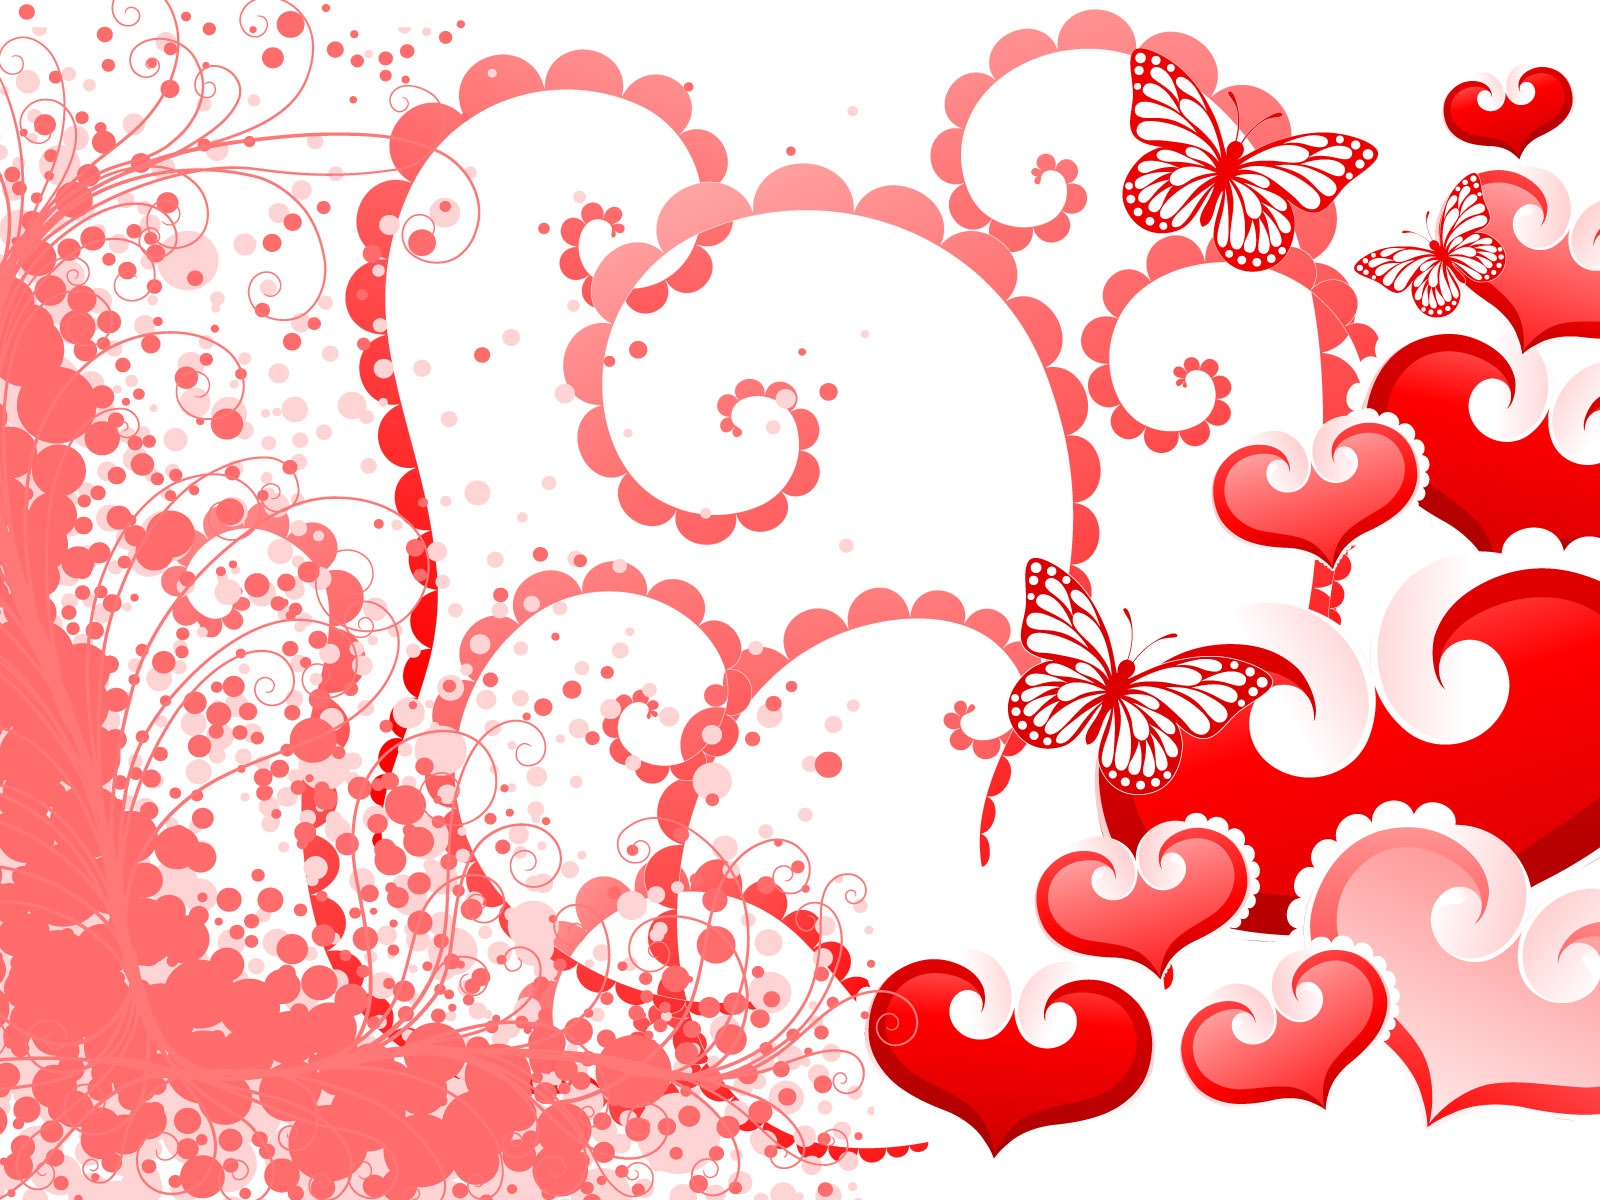 Valentine's Day Theme Wallpapers (6) #6 - 1600x1200